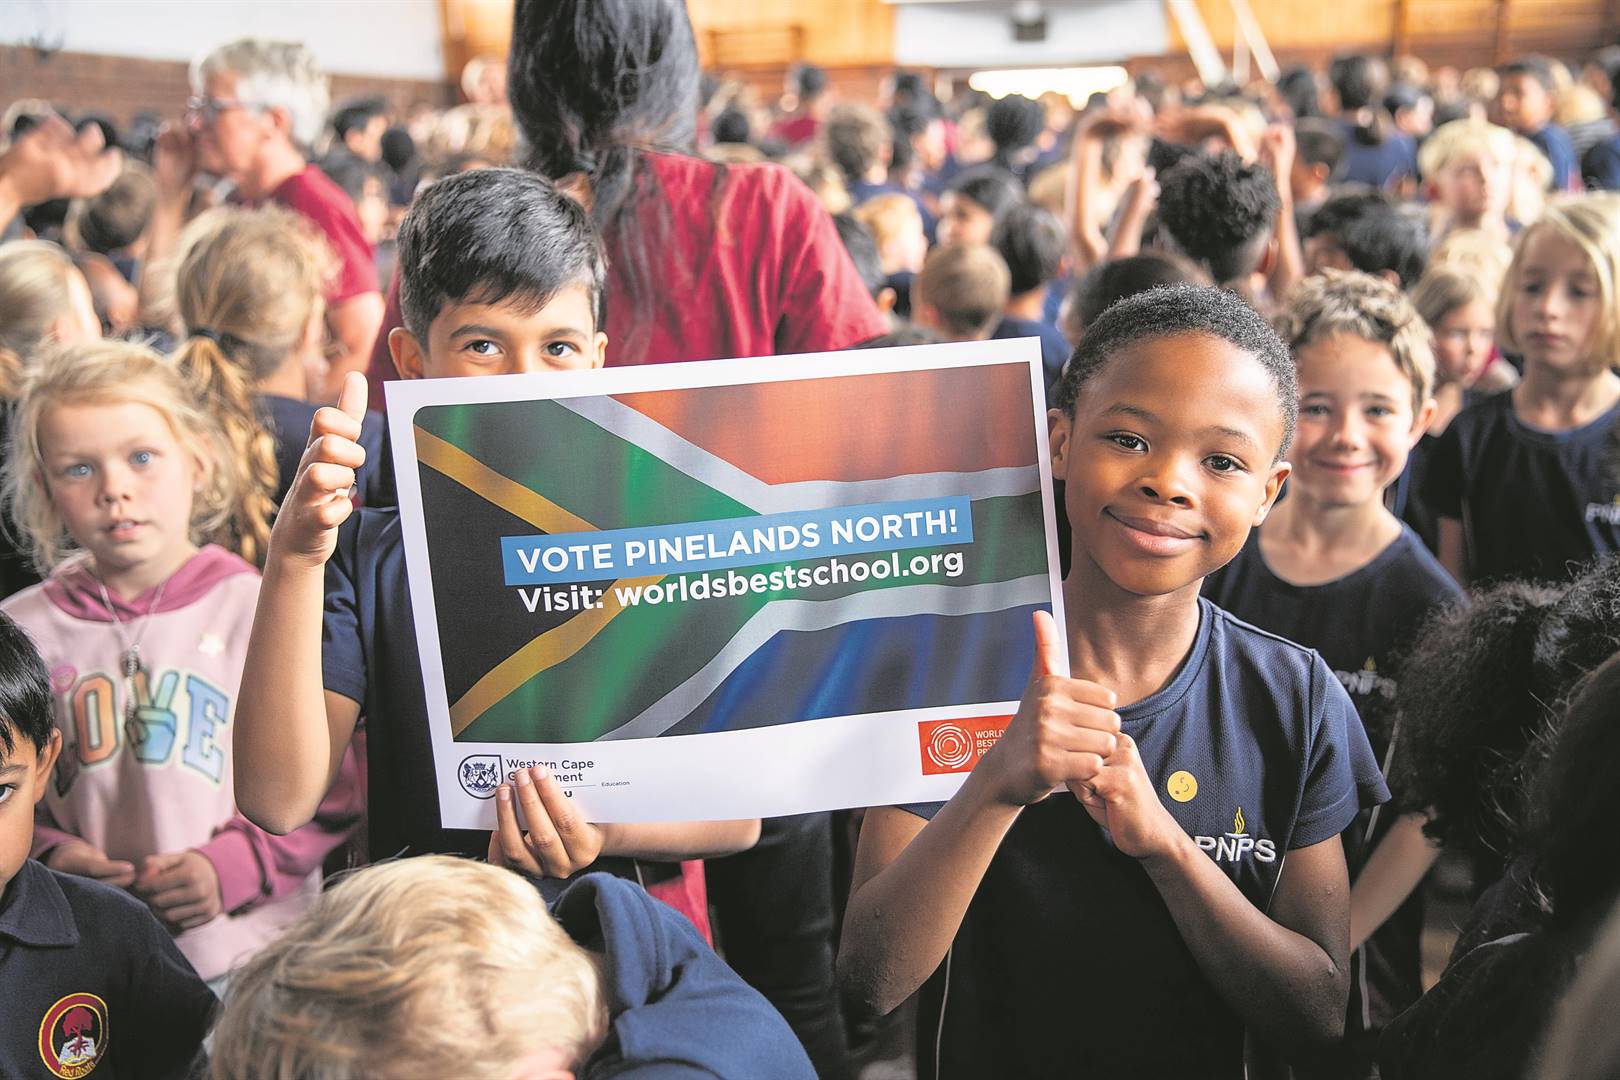 Pinelands North Primary School learners were jubilant on hearing the news that their school had been nominated among the finalists in the World’s Best School Prize for Overcoming Adversity. PHOTO: Supplied